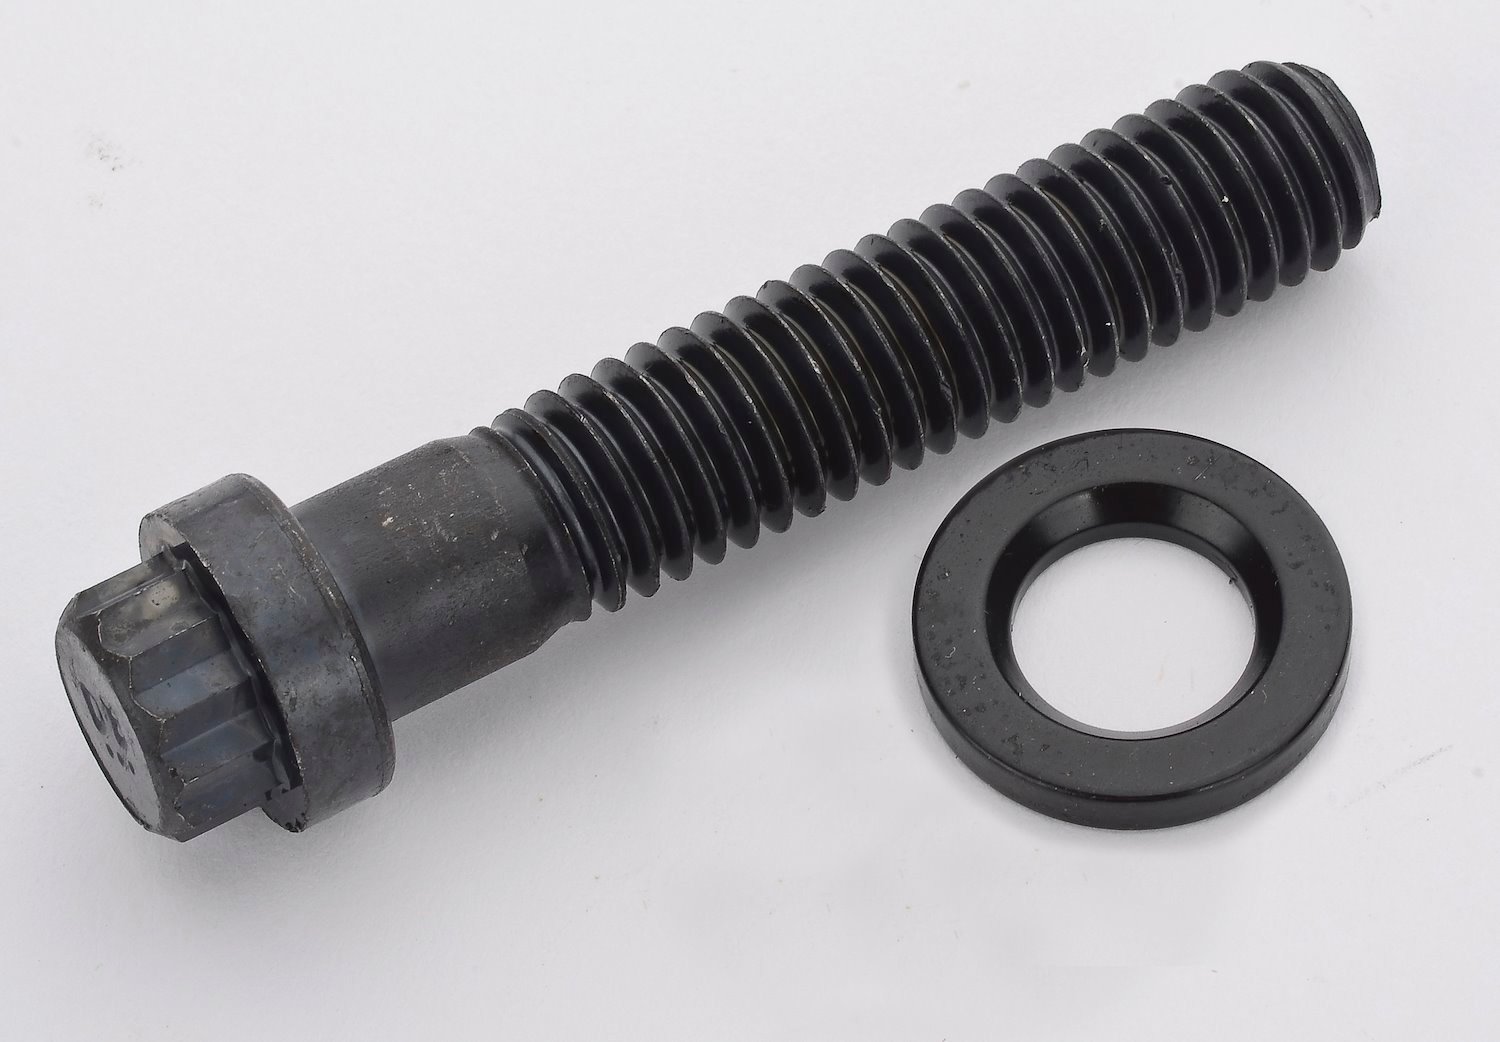 Oil Pump Bolt for Small Block Chevy using a Small Block Oil Pump